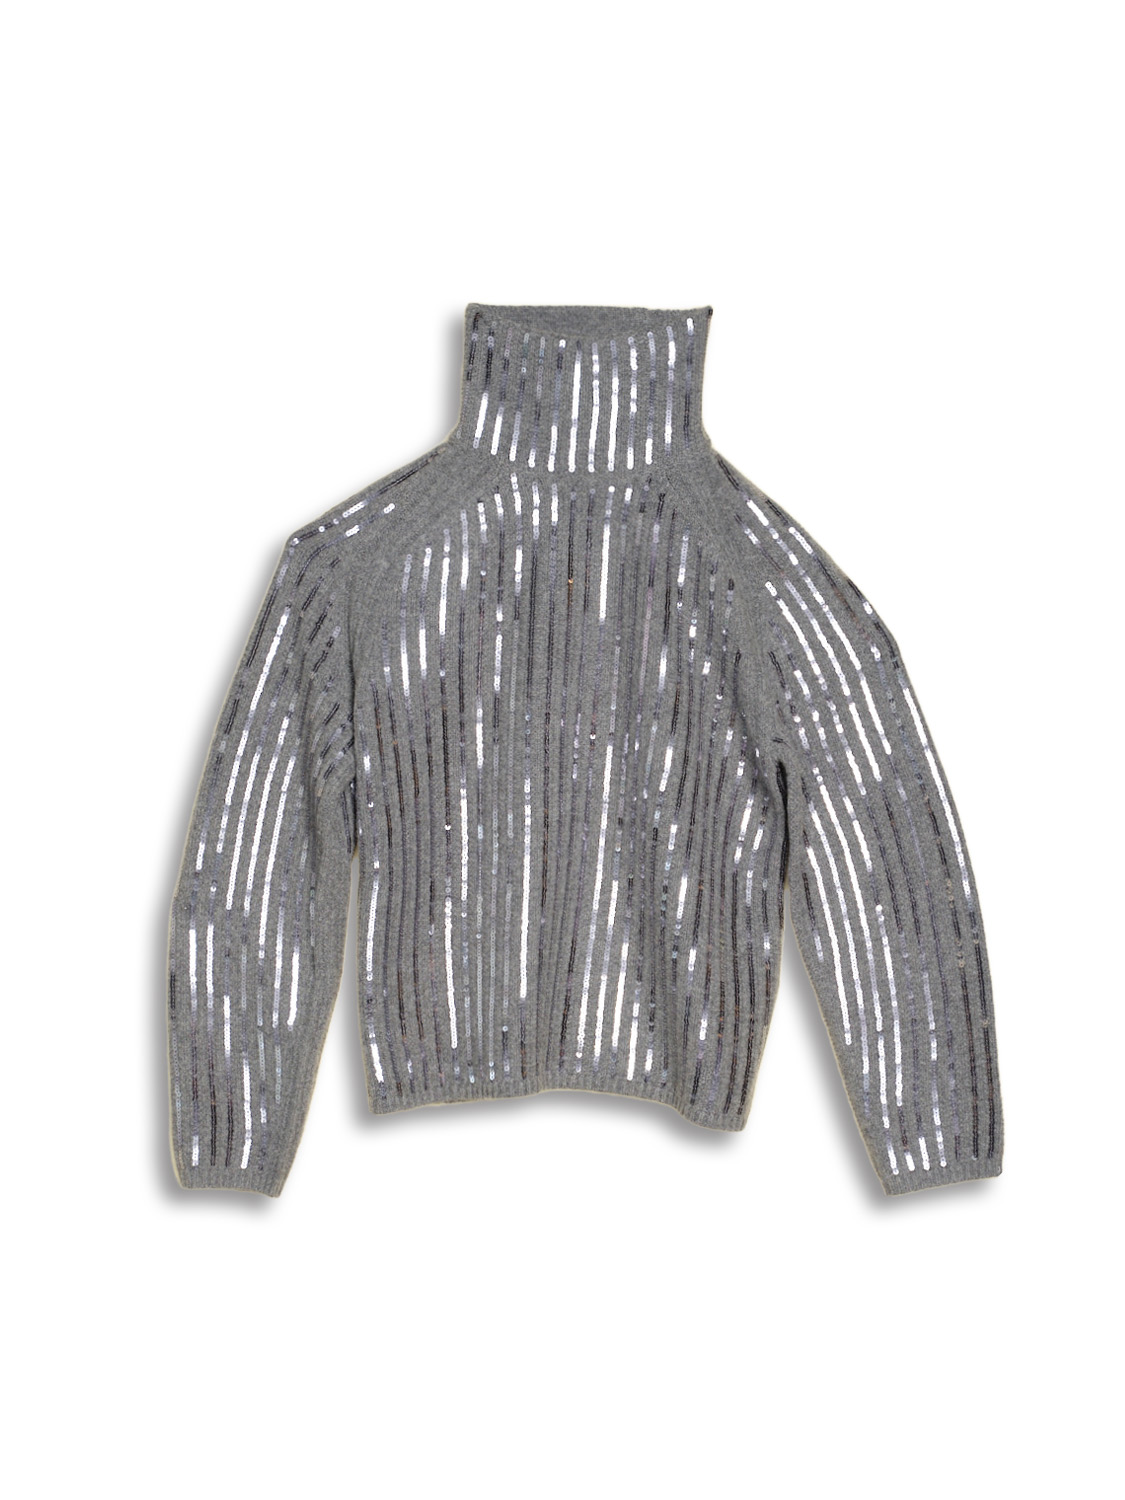 Sequin Statements - Turtleneck sweater with sequins stripes